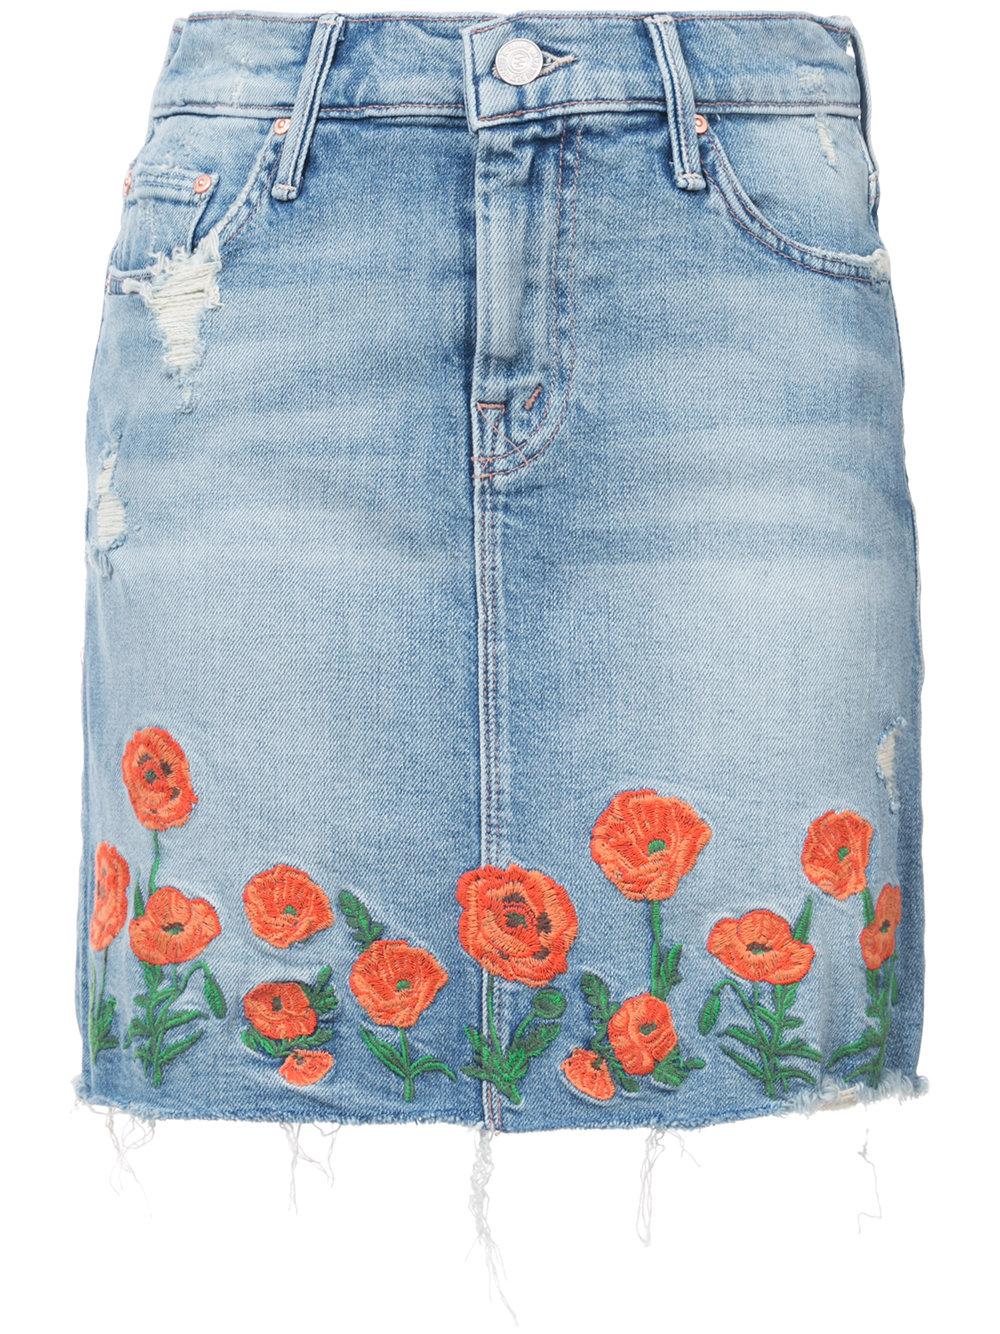 embroidered jean skirt